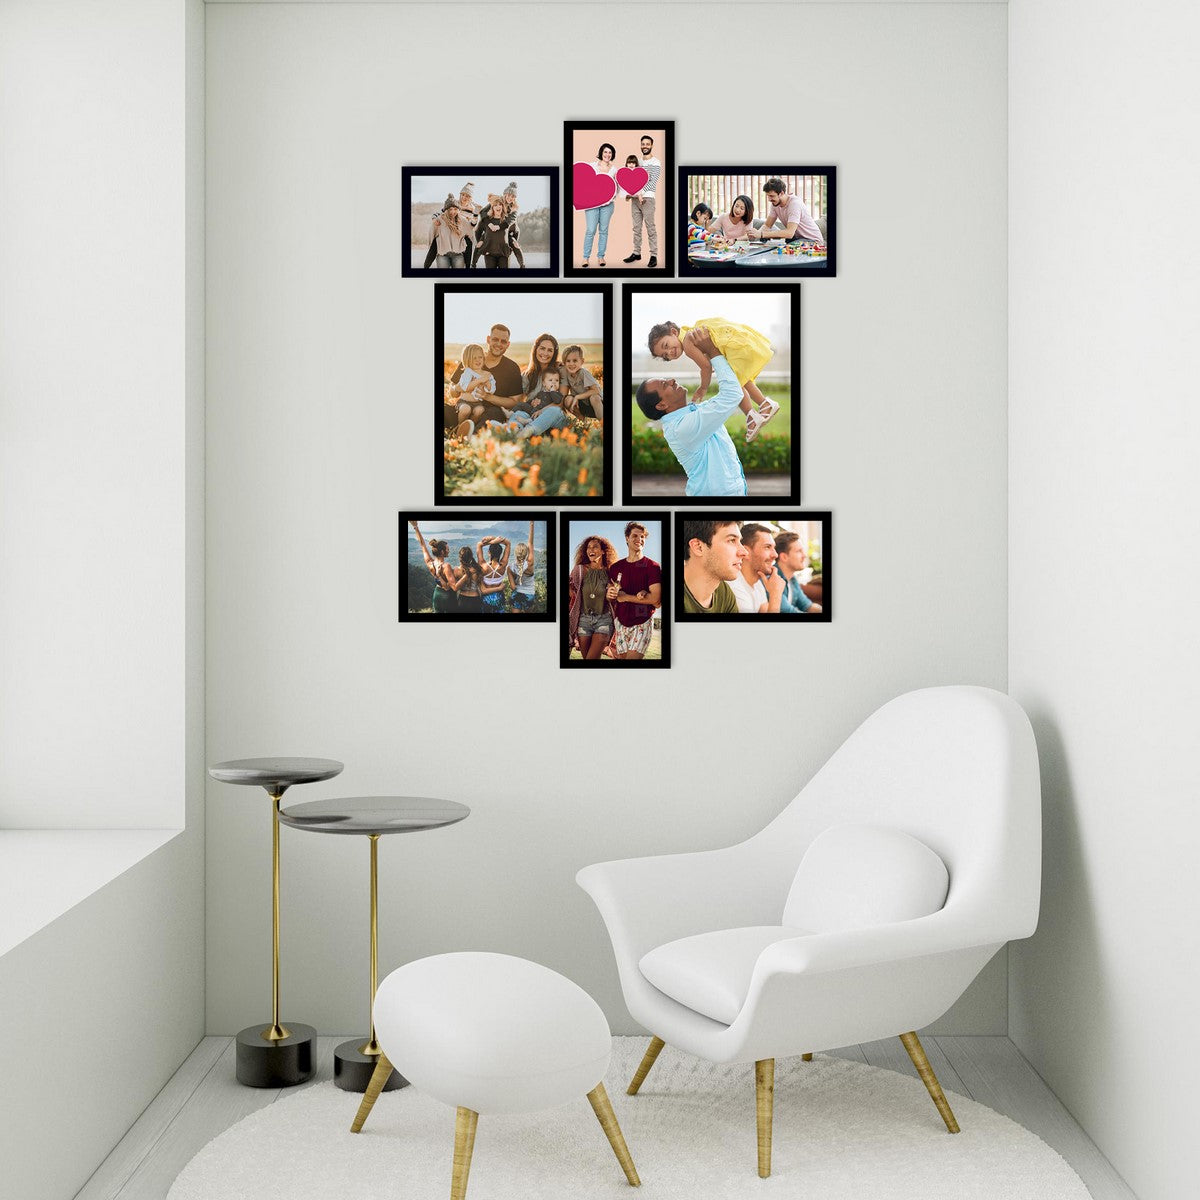 Memory Wall Collage Photo Frame - Set of 8 Photo Frames for 6 Photos of 5"x7", 2 Photos of 8"x10" 2